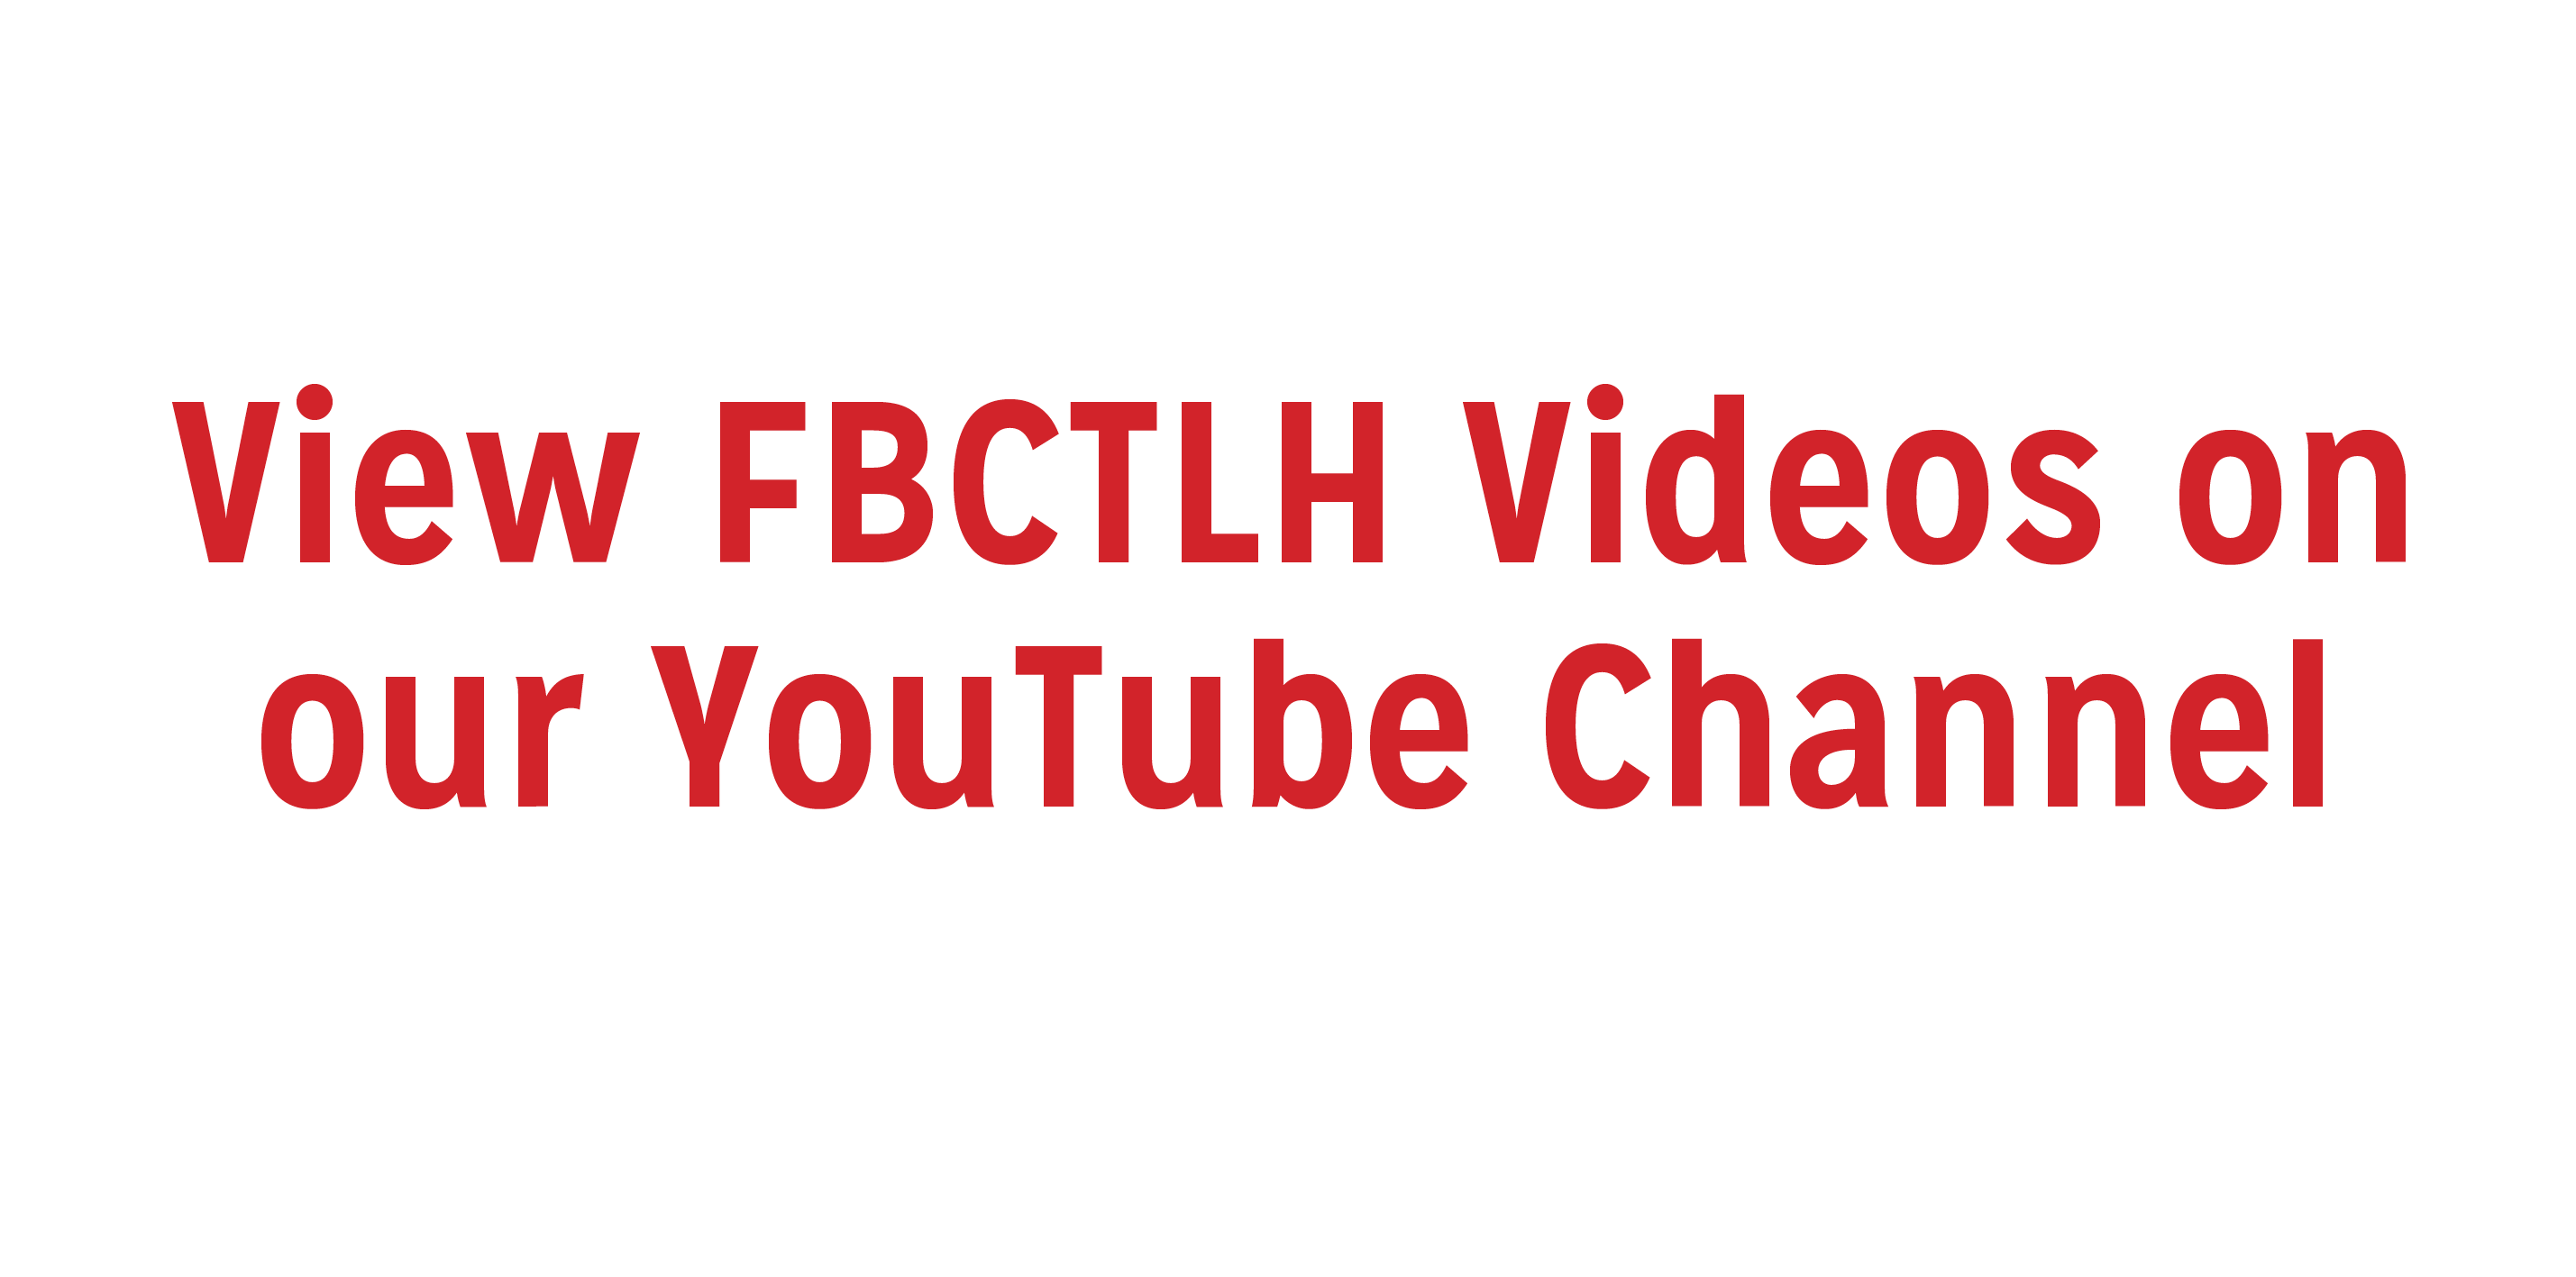 VIEW FBCTLH VIDEOS ON YOUTUBE